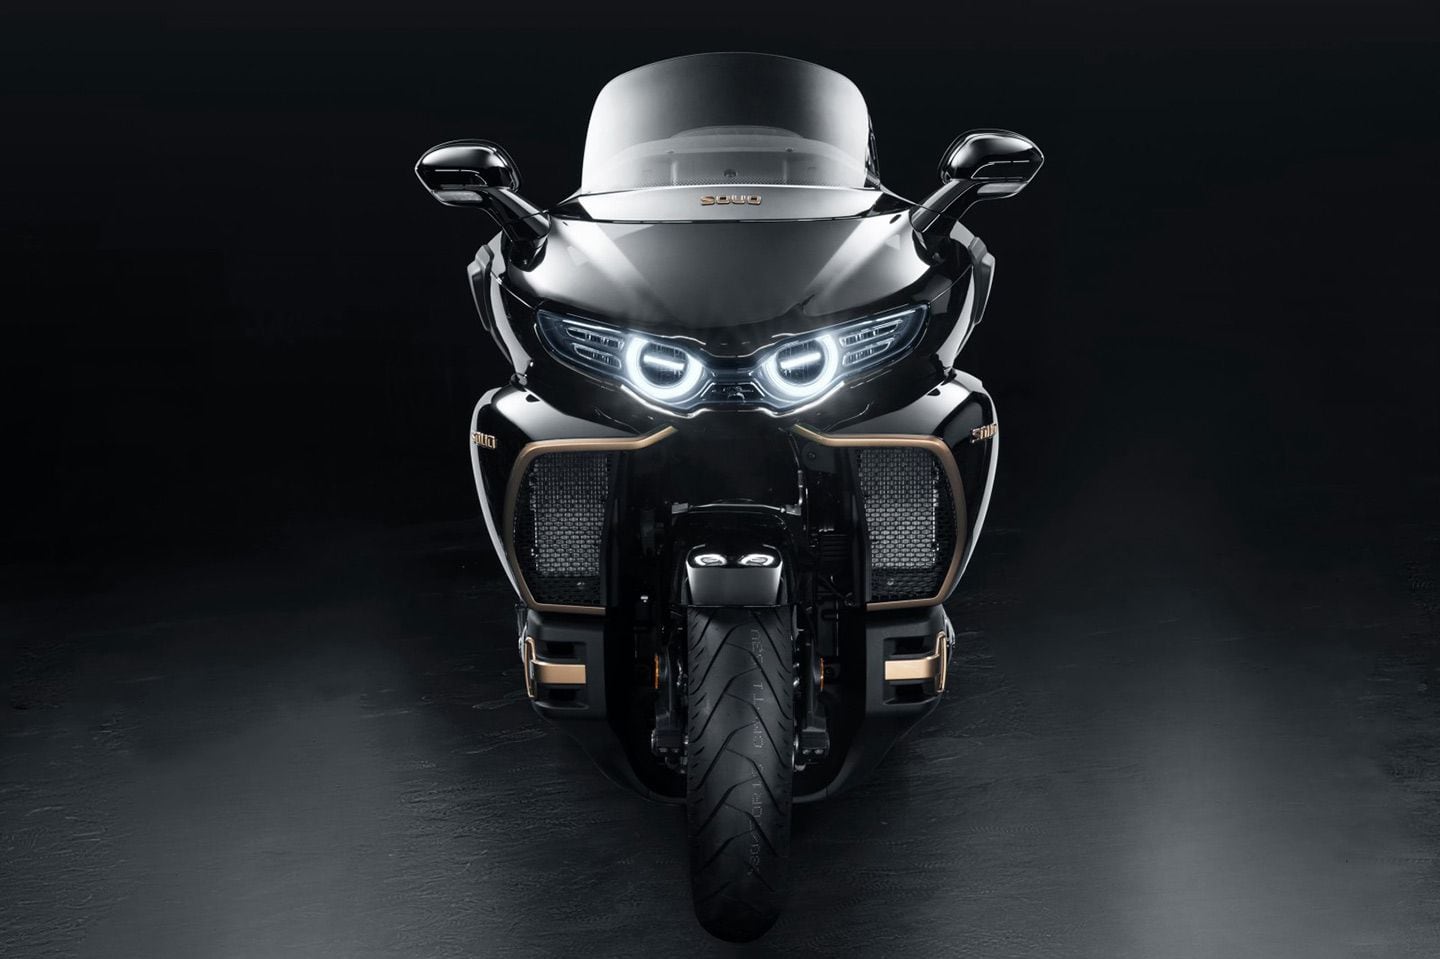 The headlights were designed to mimic the eyes of a lion.